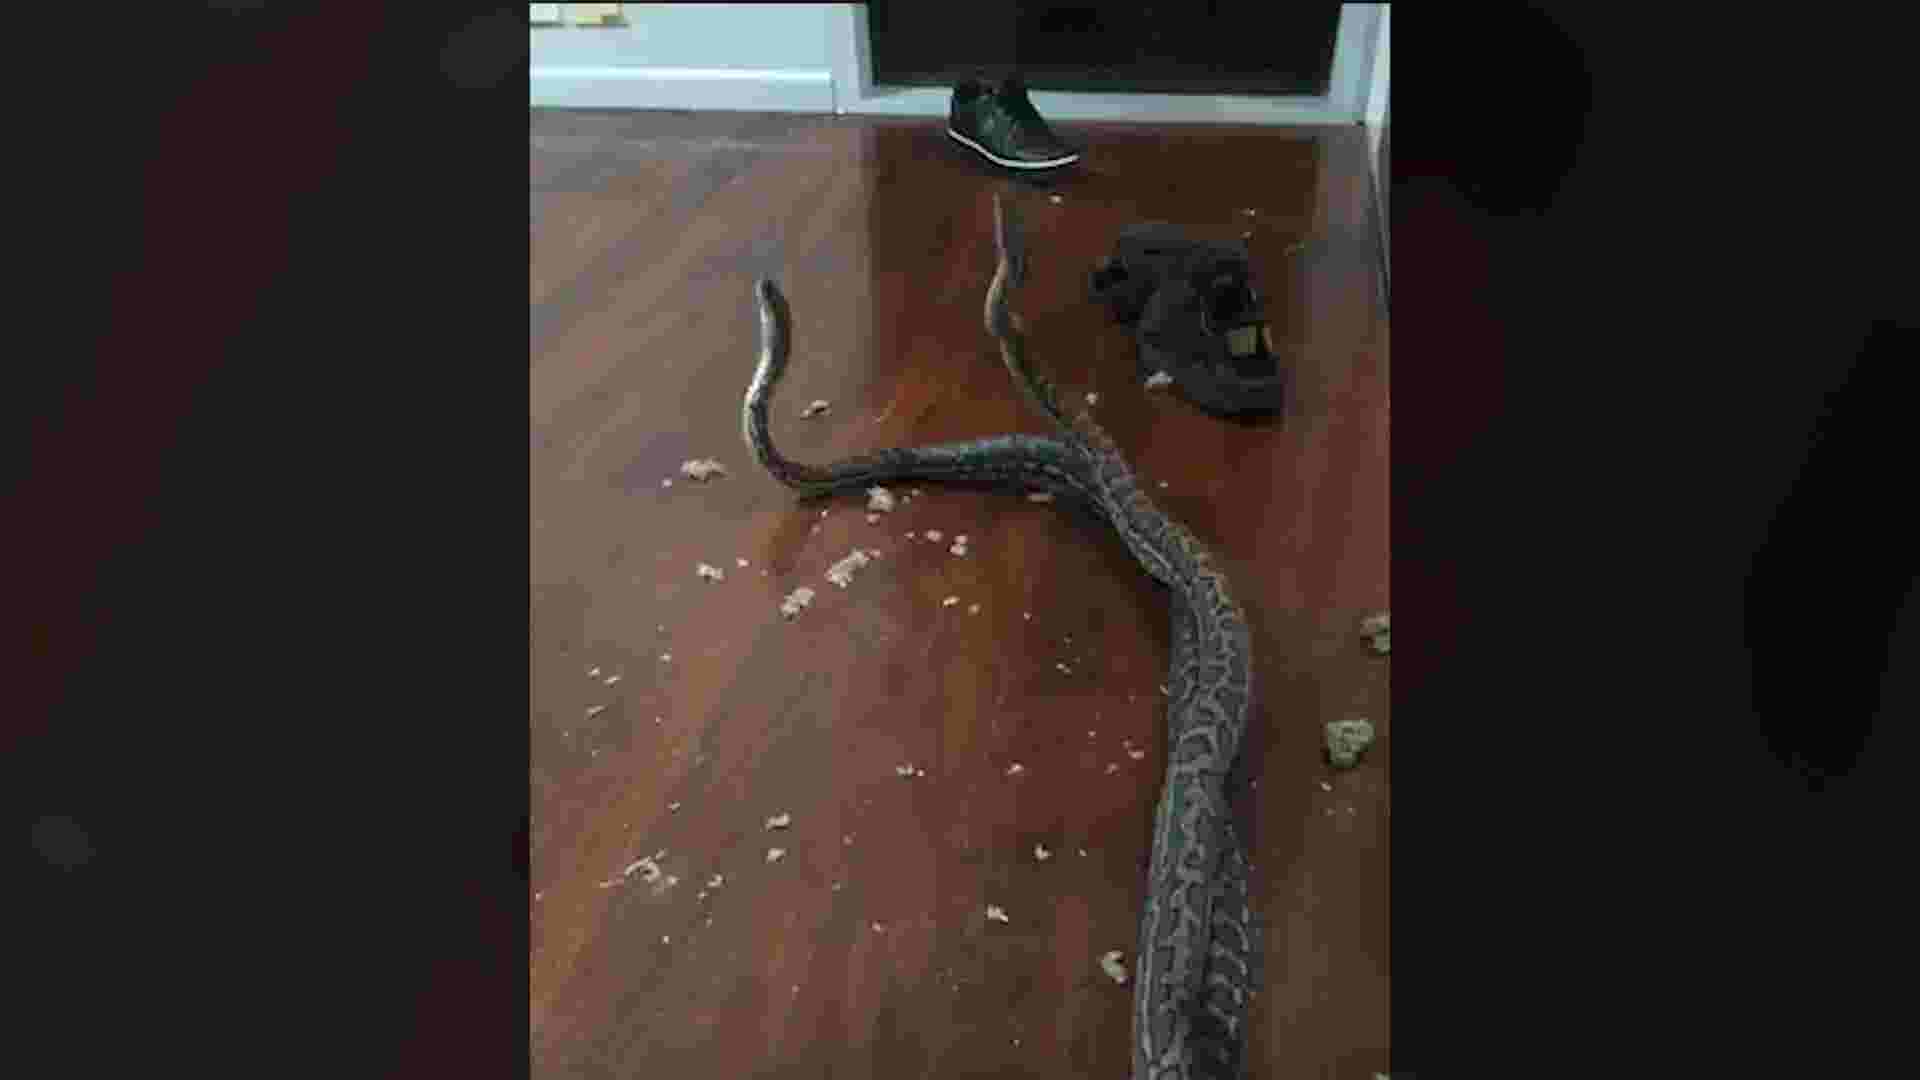 Pair of fighting snakes fall through family's bedroom ceiling